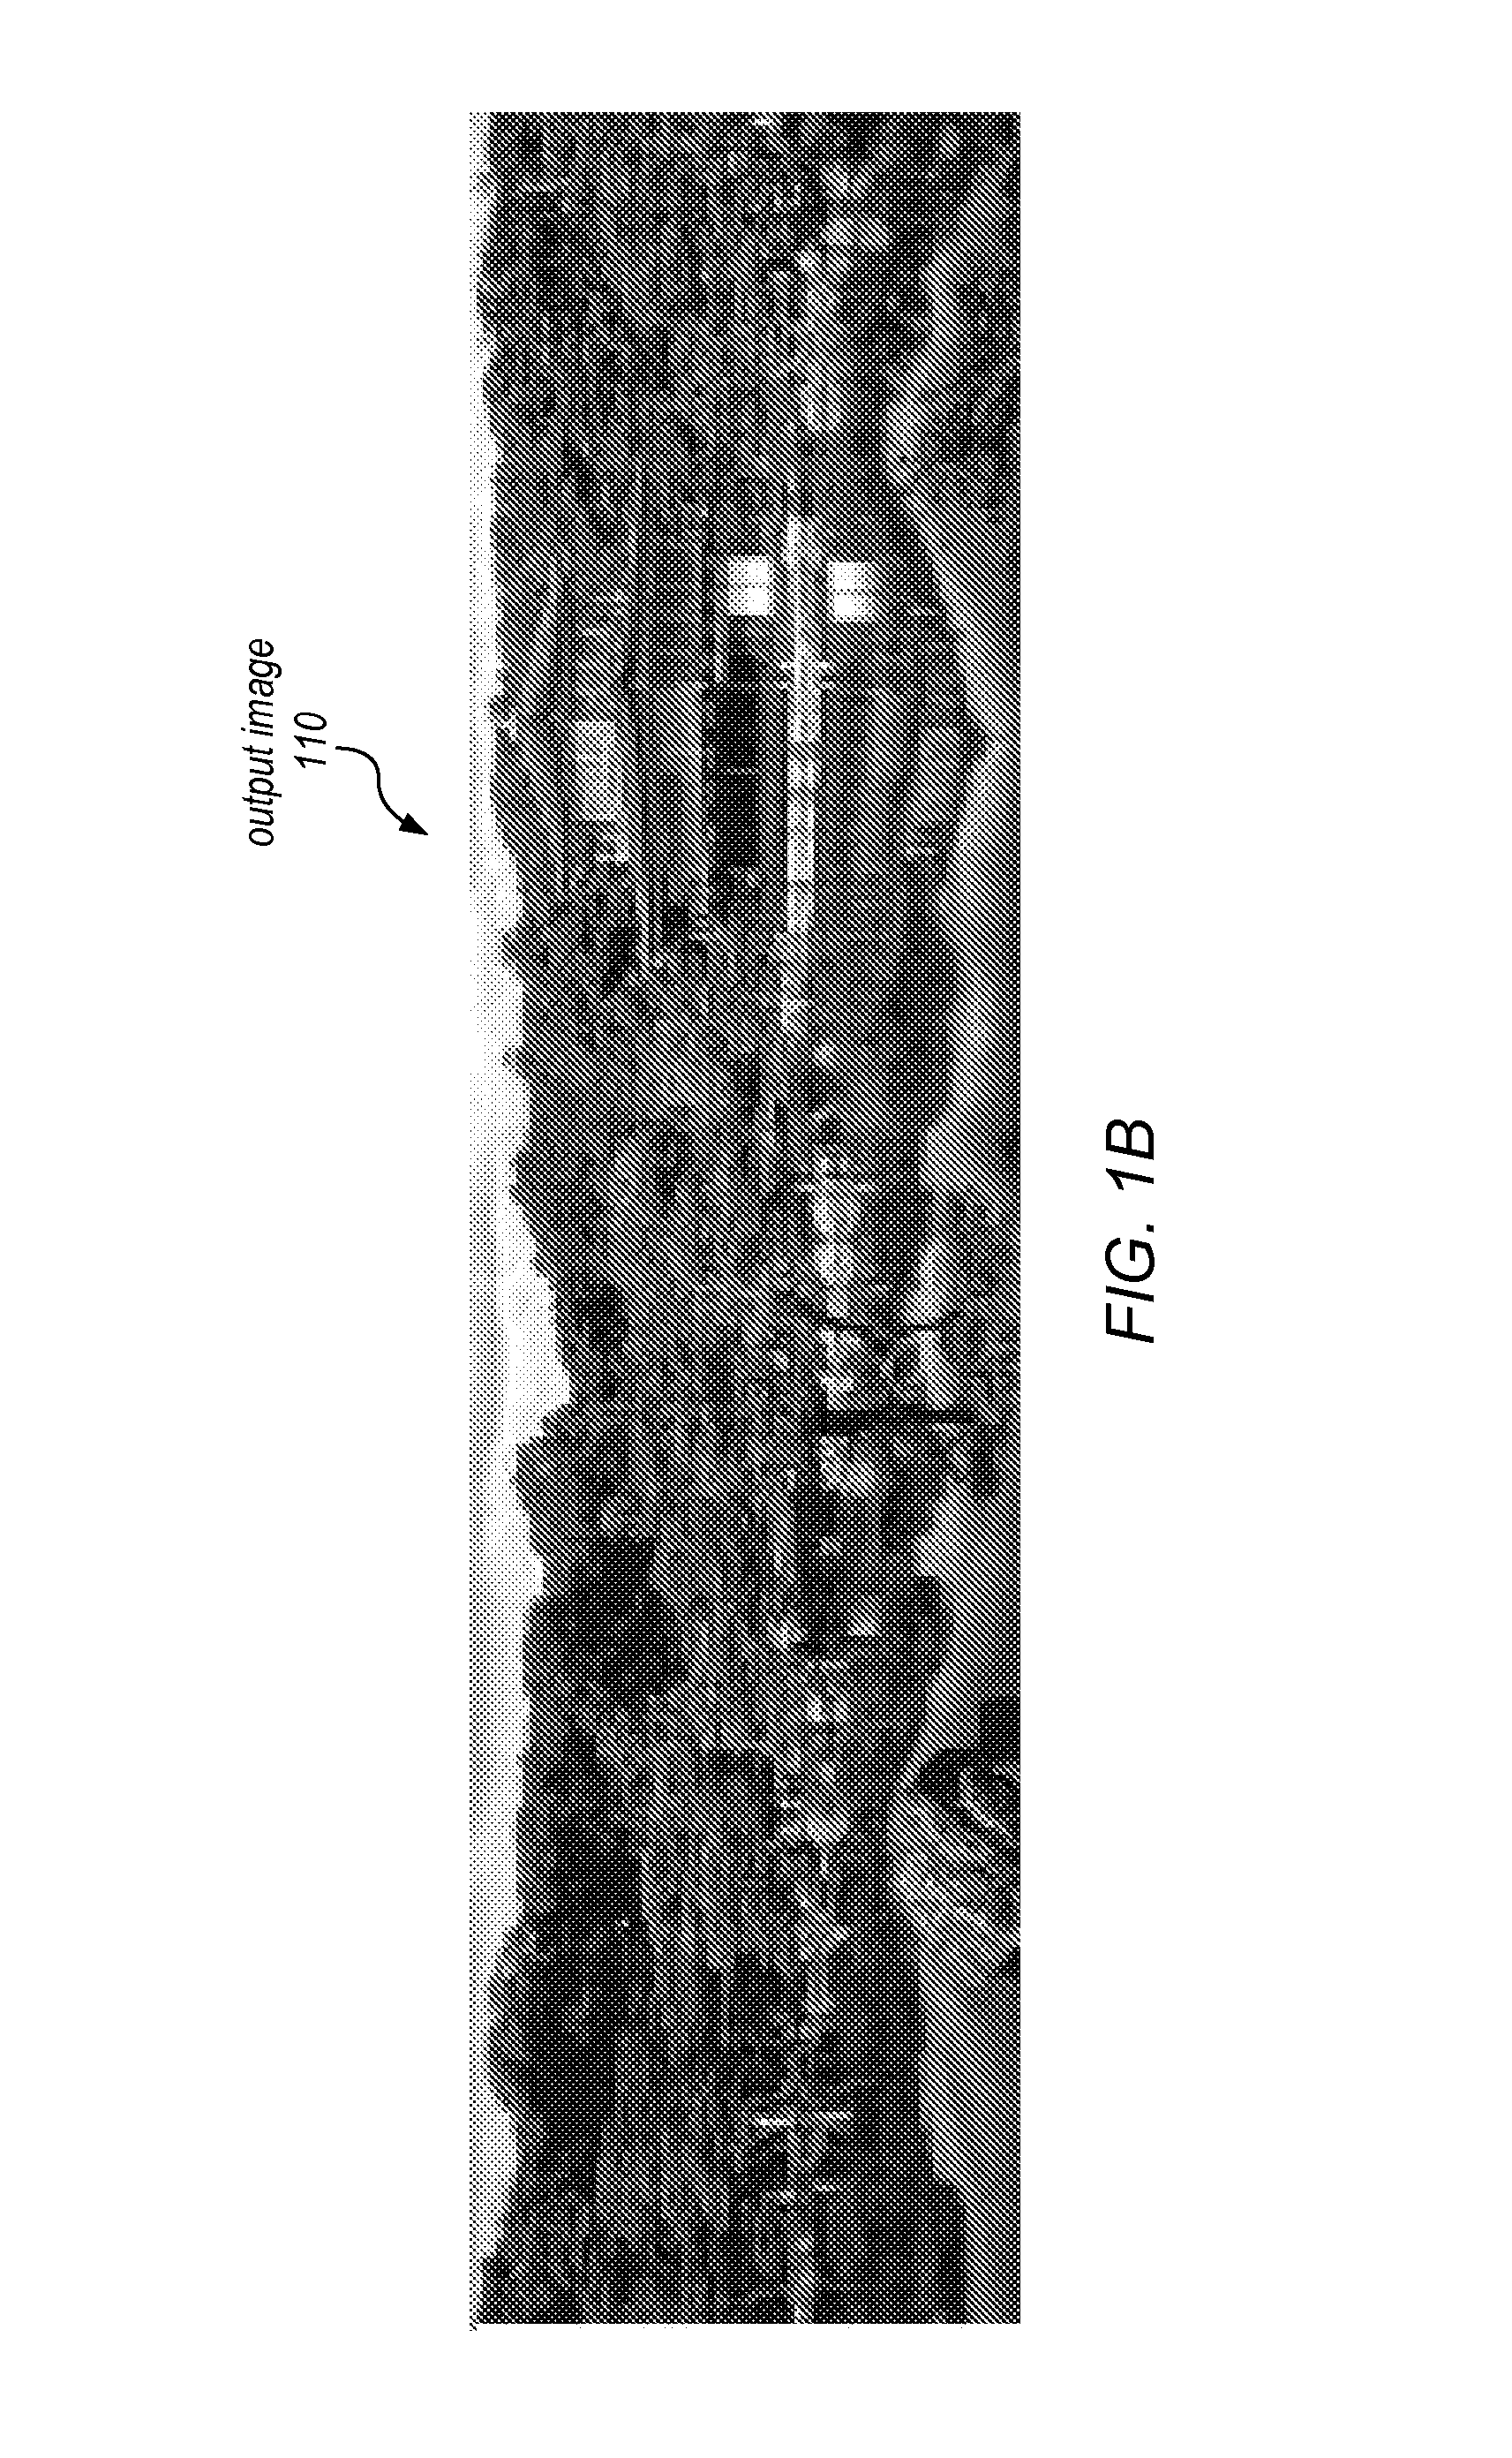 Seam-based reduction and expansion of images using partial solution matrix dependent on dynamic programming access pattern